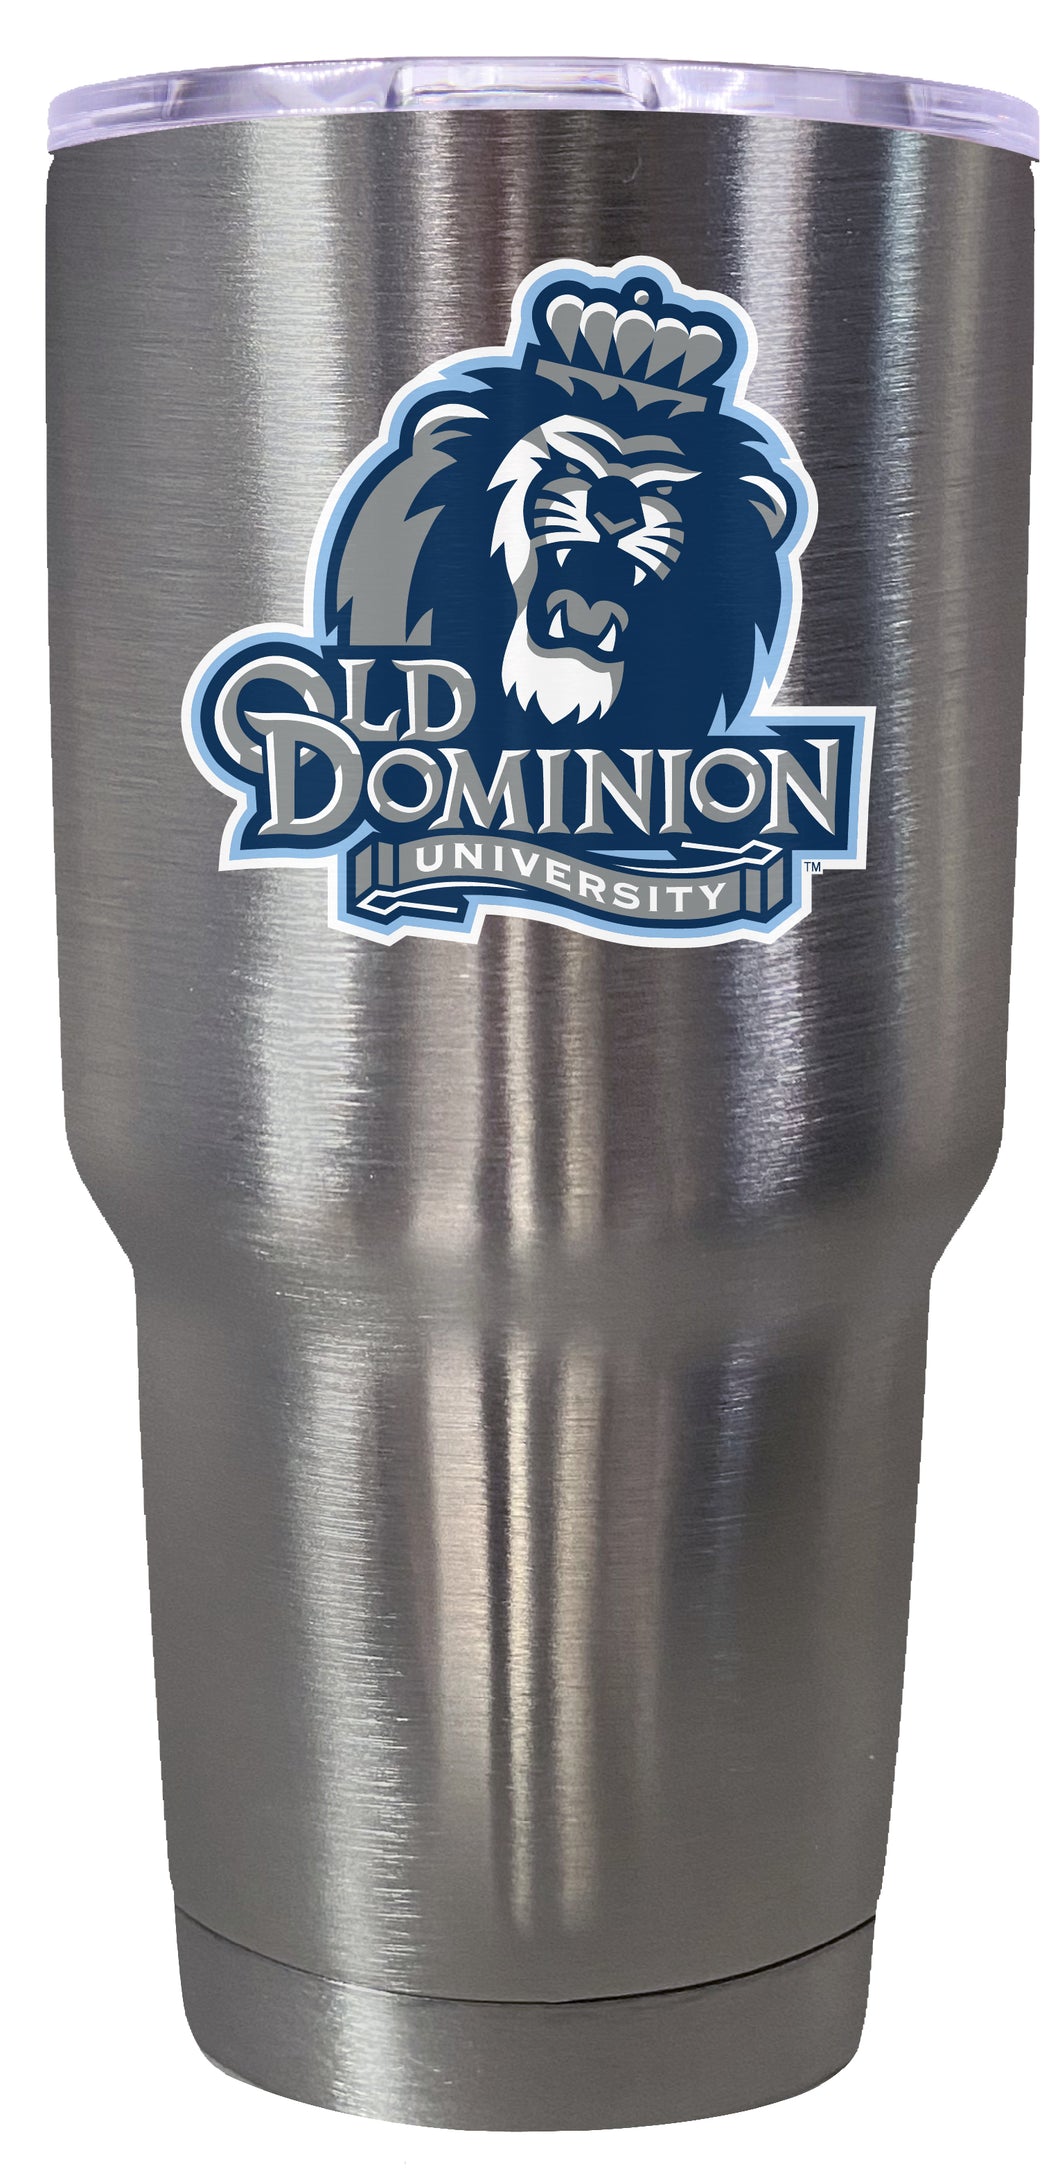 Old Dominion Monarchs Mascot Logo Tumbler - 24oz Color-Choice Insulated Stainless Steel Mug